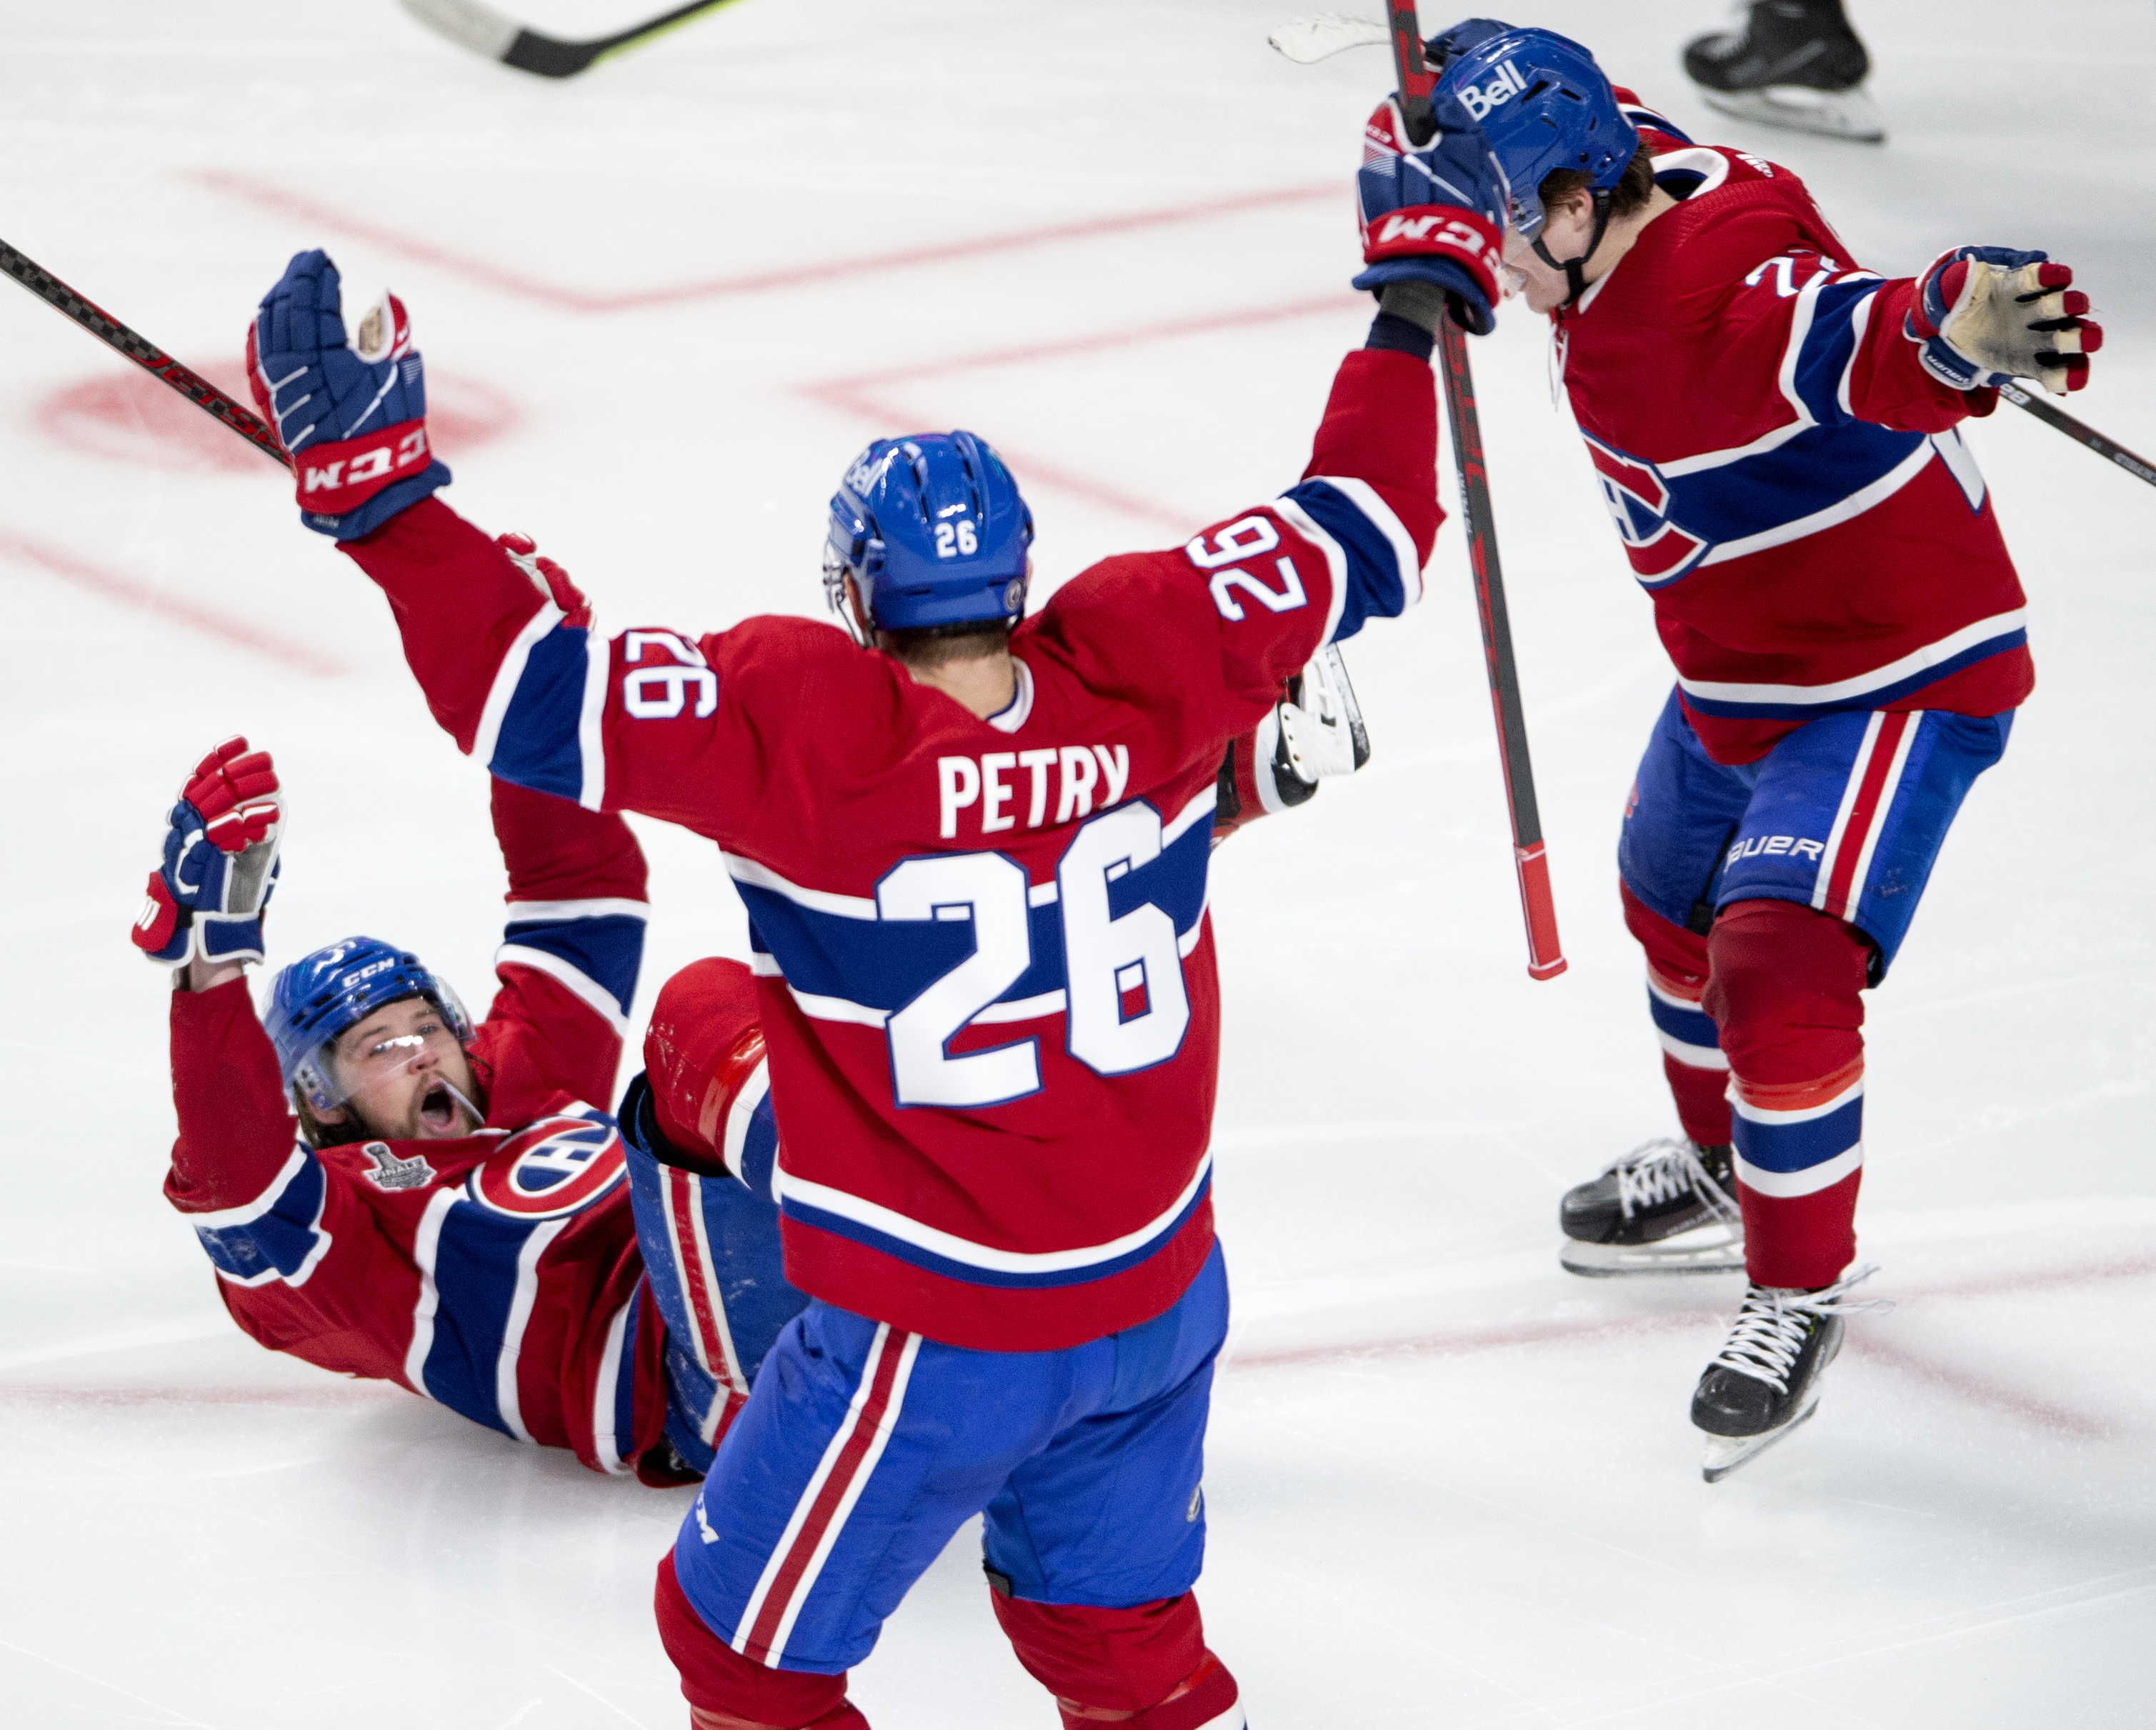 Anderson scores in OT, Habs beat Lightning 3-2 to stay alive in